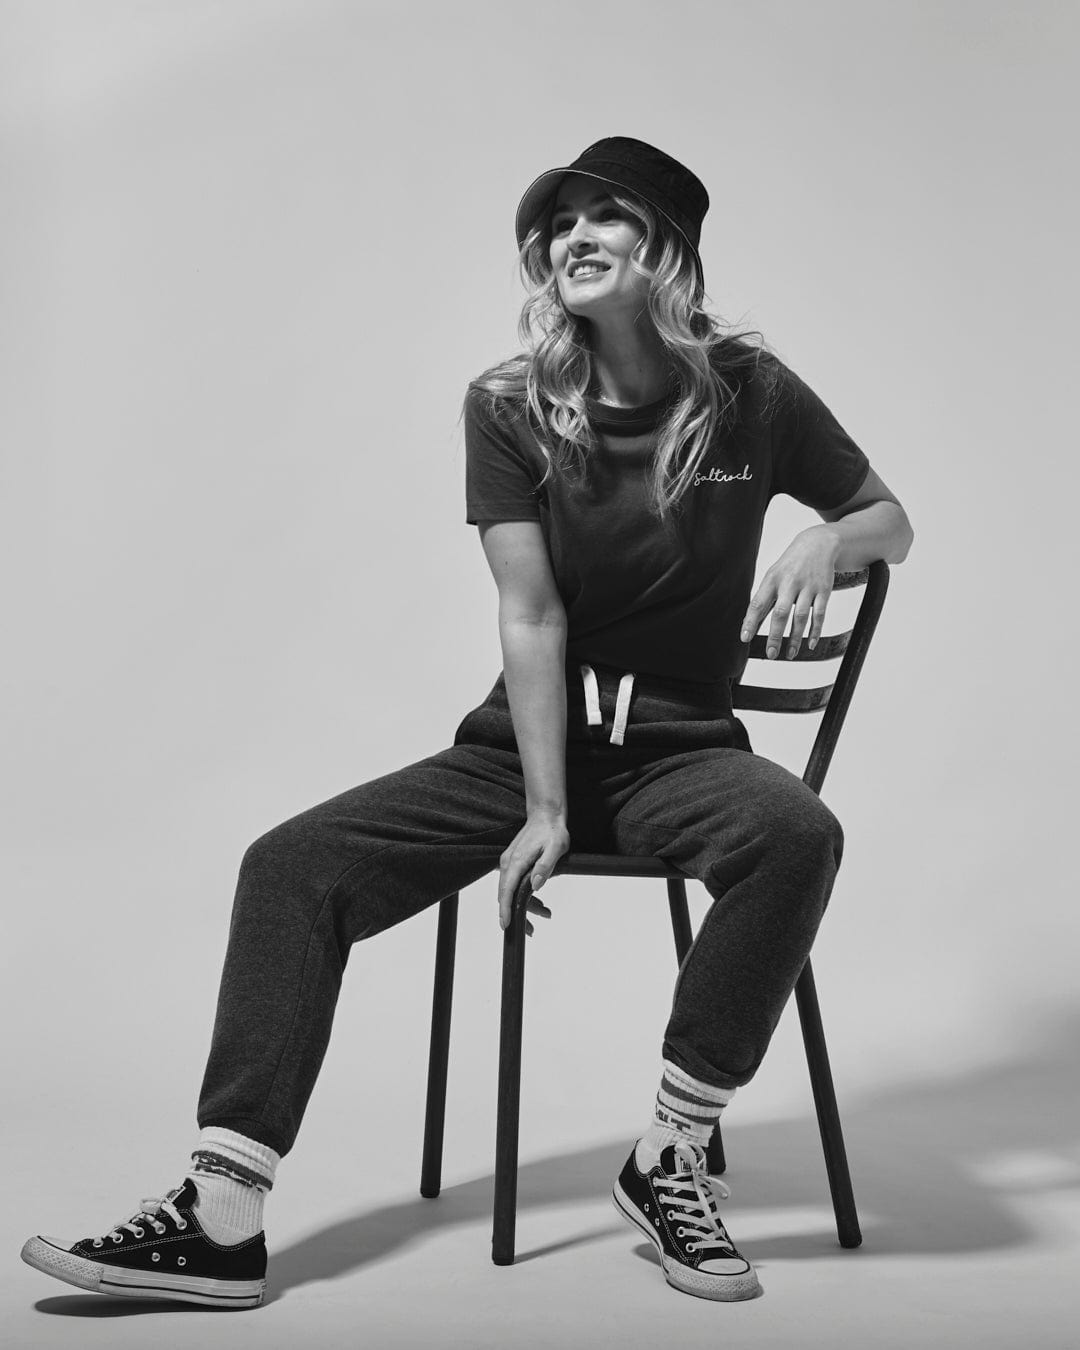 A woman in a casual outfit featuring Saltrock branding, with a Velator - Womens Joggers - Blue cap, sitting on a chair and smiling, in a monochrome studio setting.